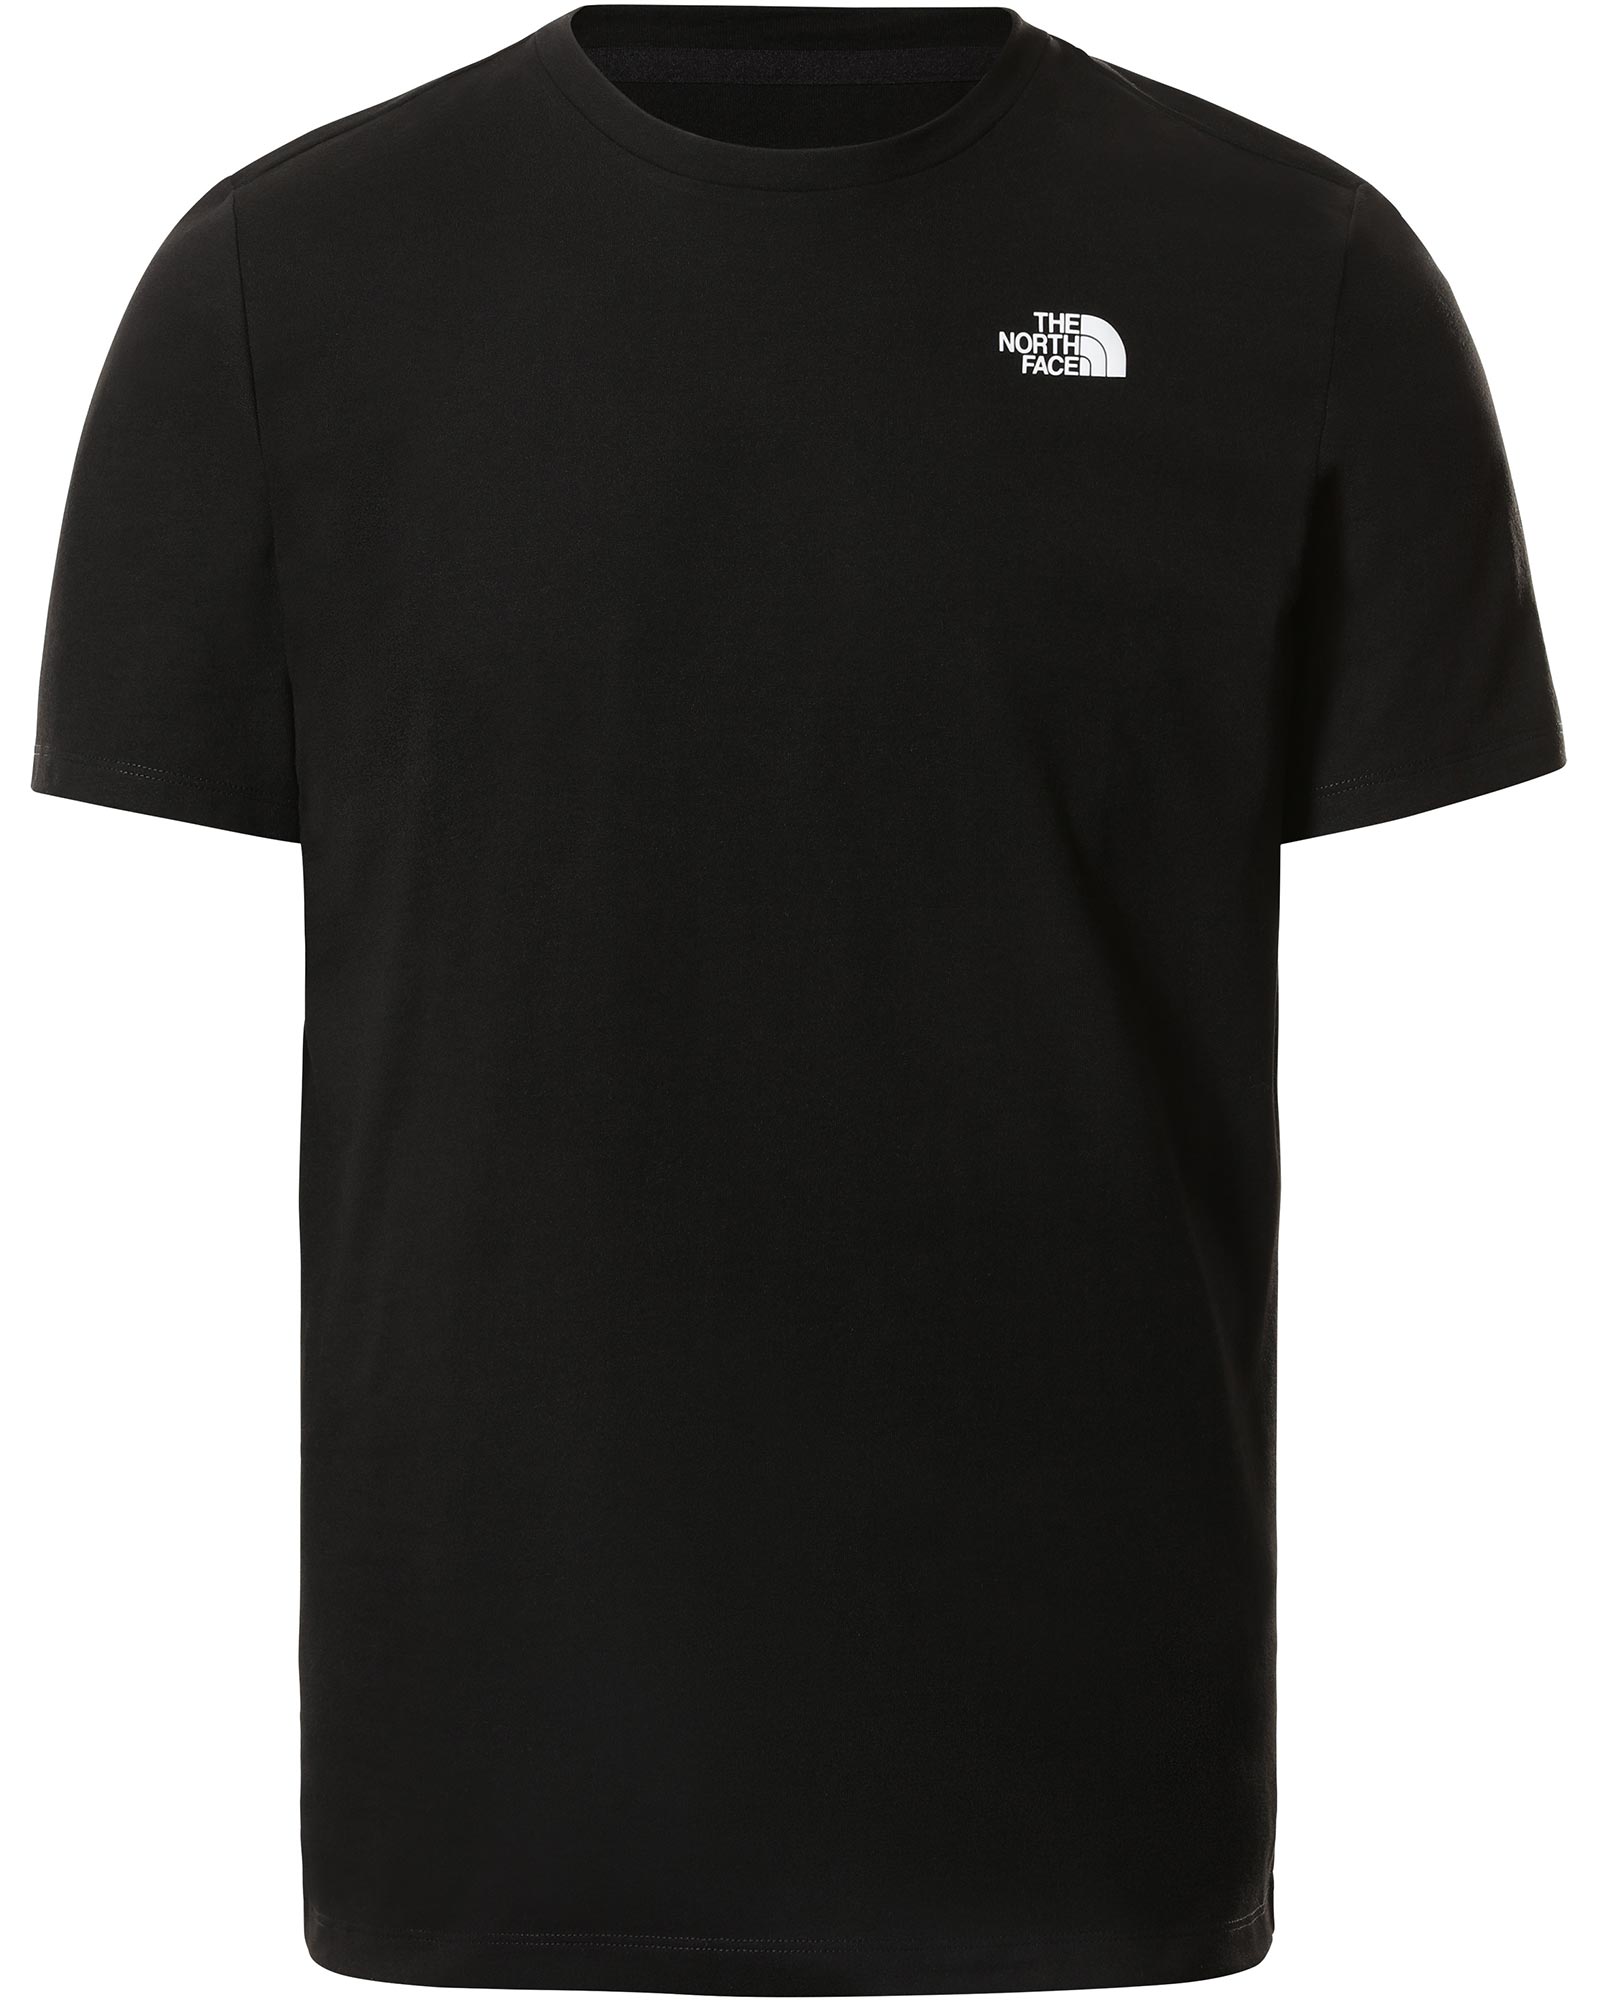 The North Face Foundation Mens T-shirt